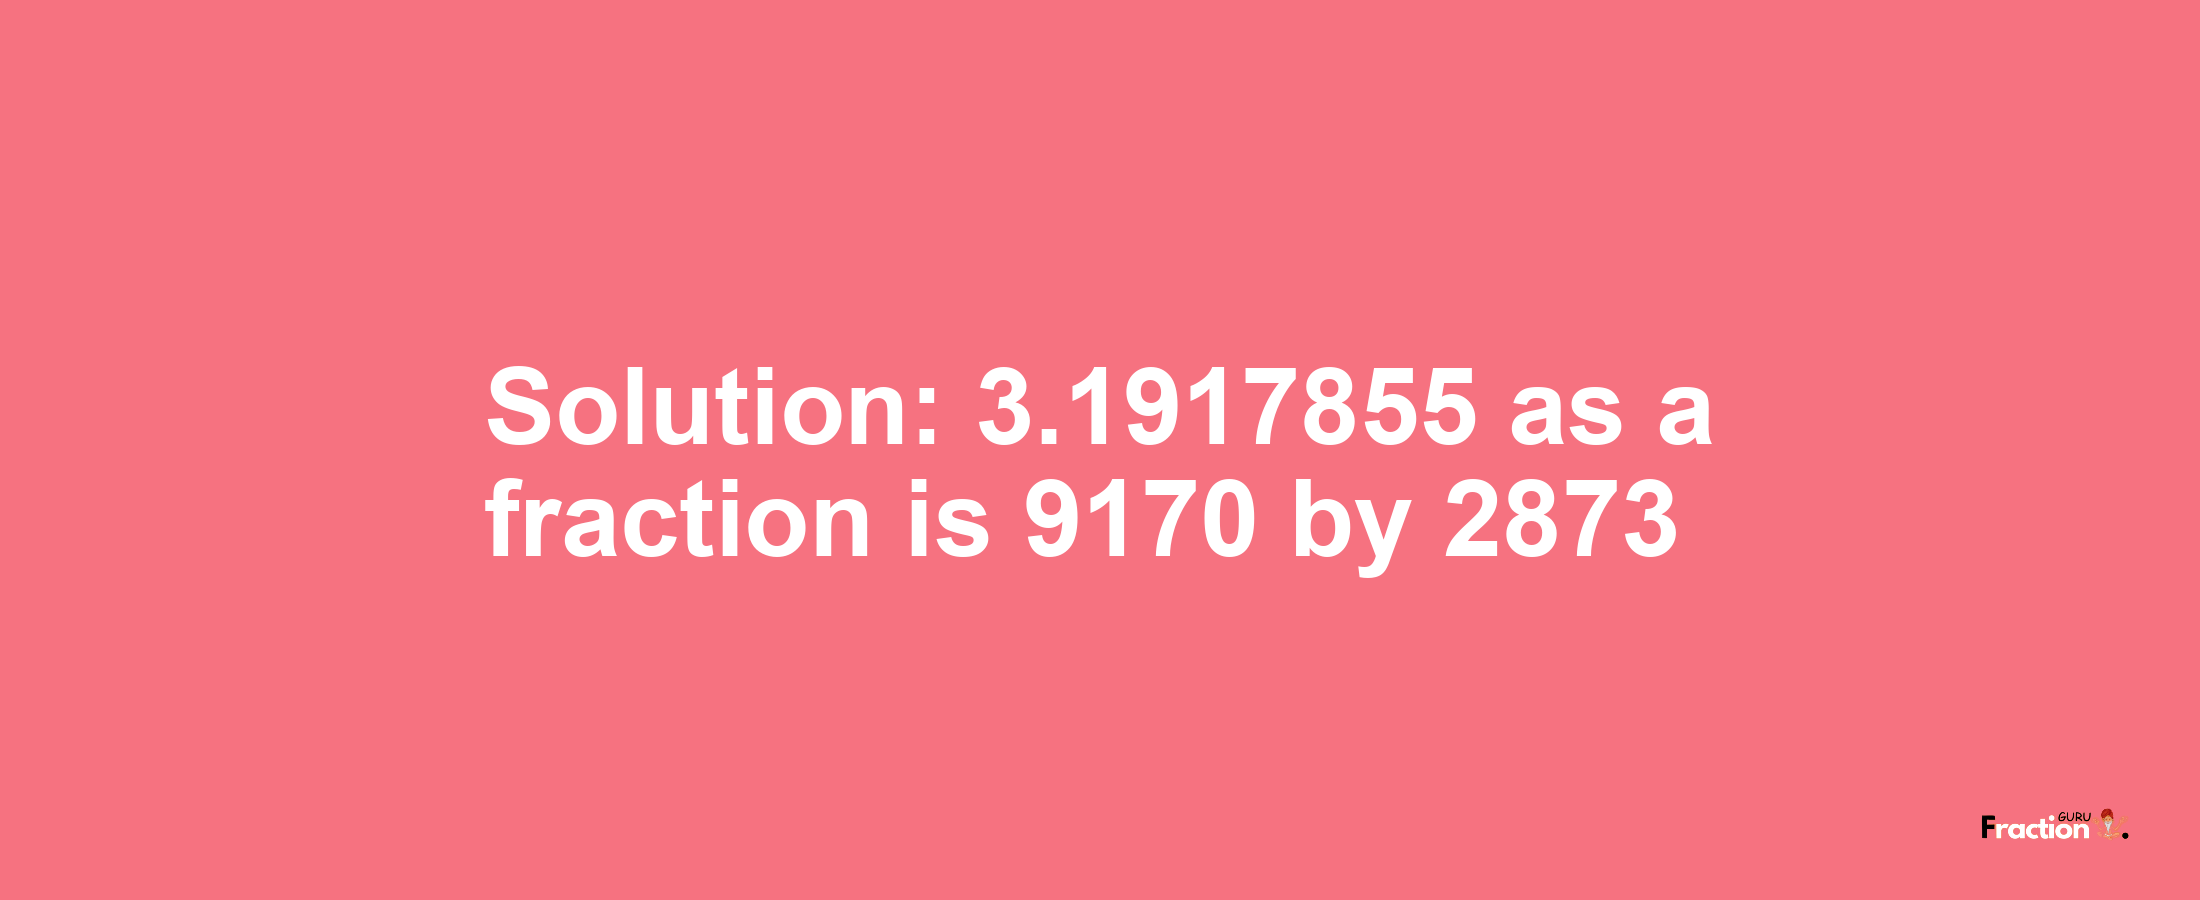 Solution:3.1917855 as a fraction is 9170/2873